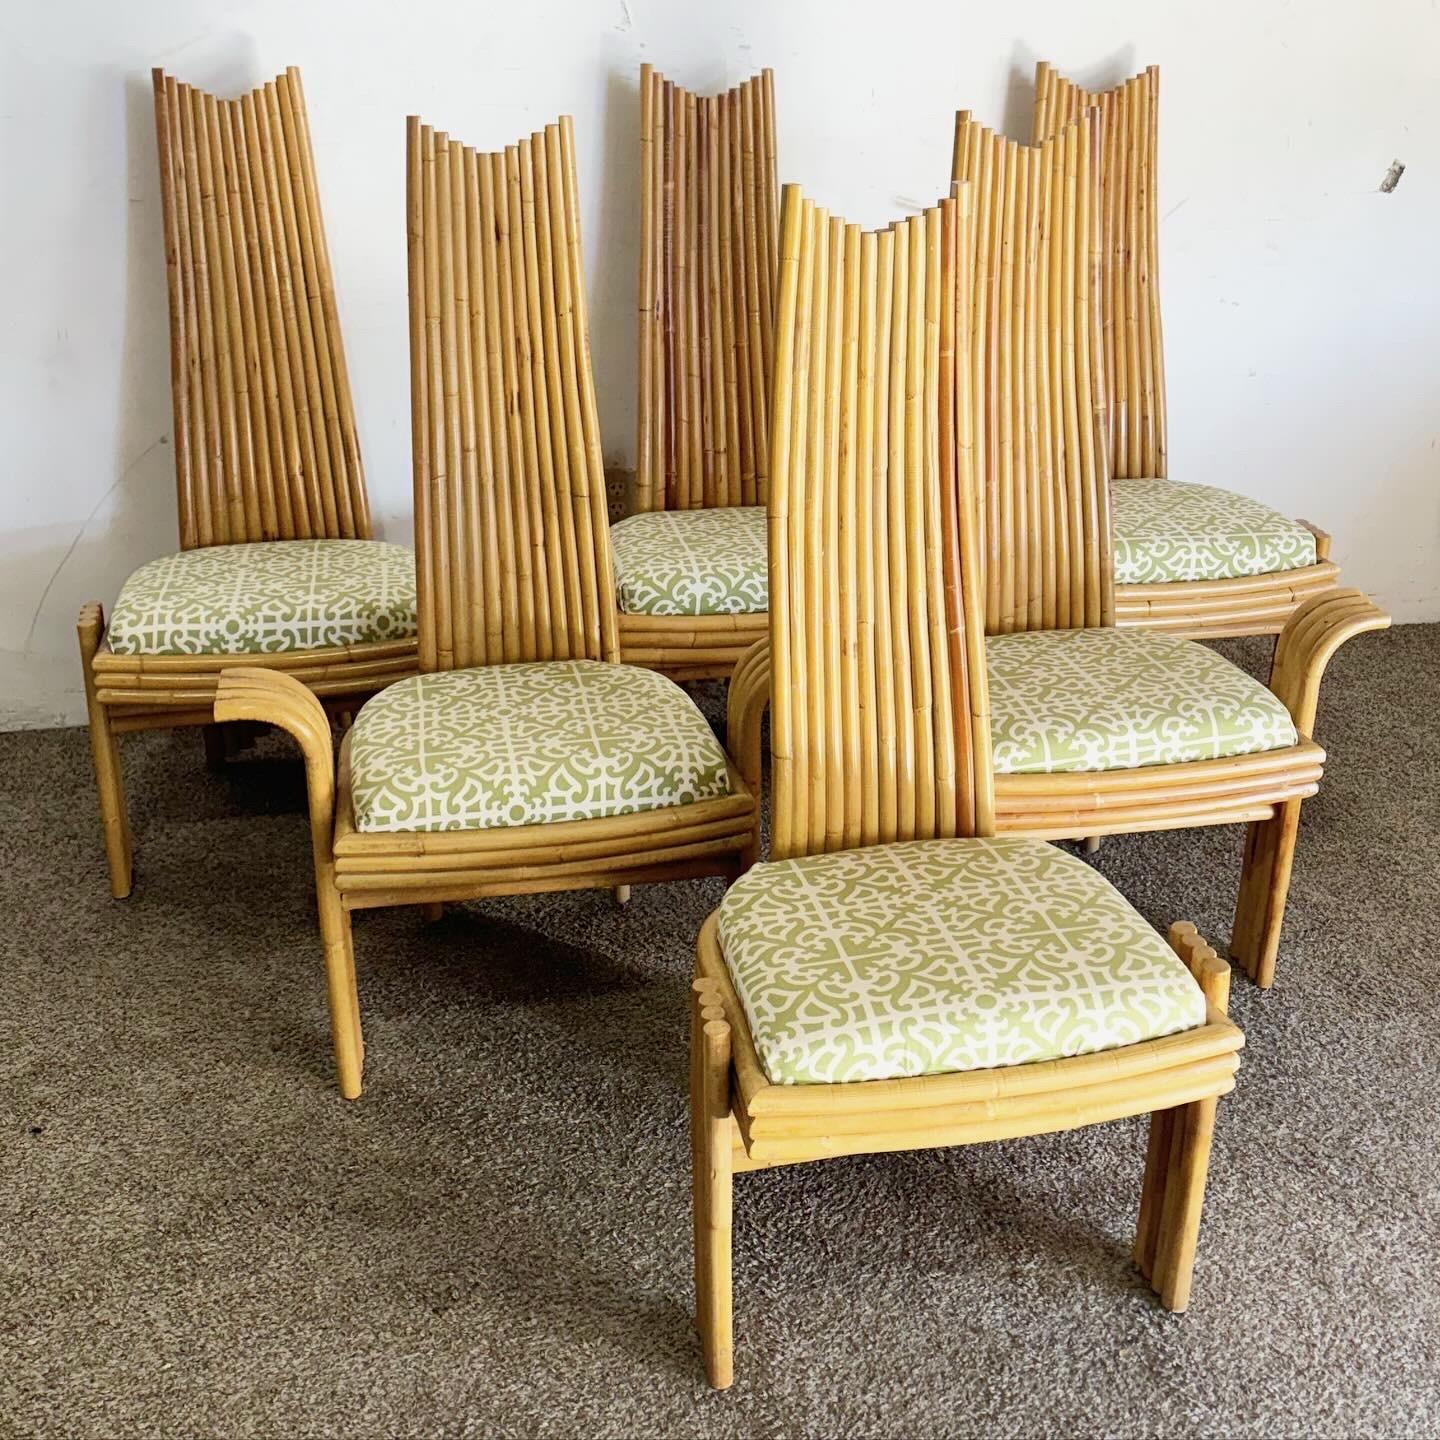 Travel back to the 1970s with this set of six Vintage Boho Chic High Back Bamboo Dining Chairs. This set includes two captain's chairs and four side chairs, all highlighting the natural allure of bamboo. The high back design offers elegance and